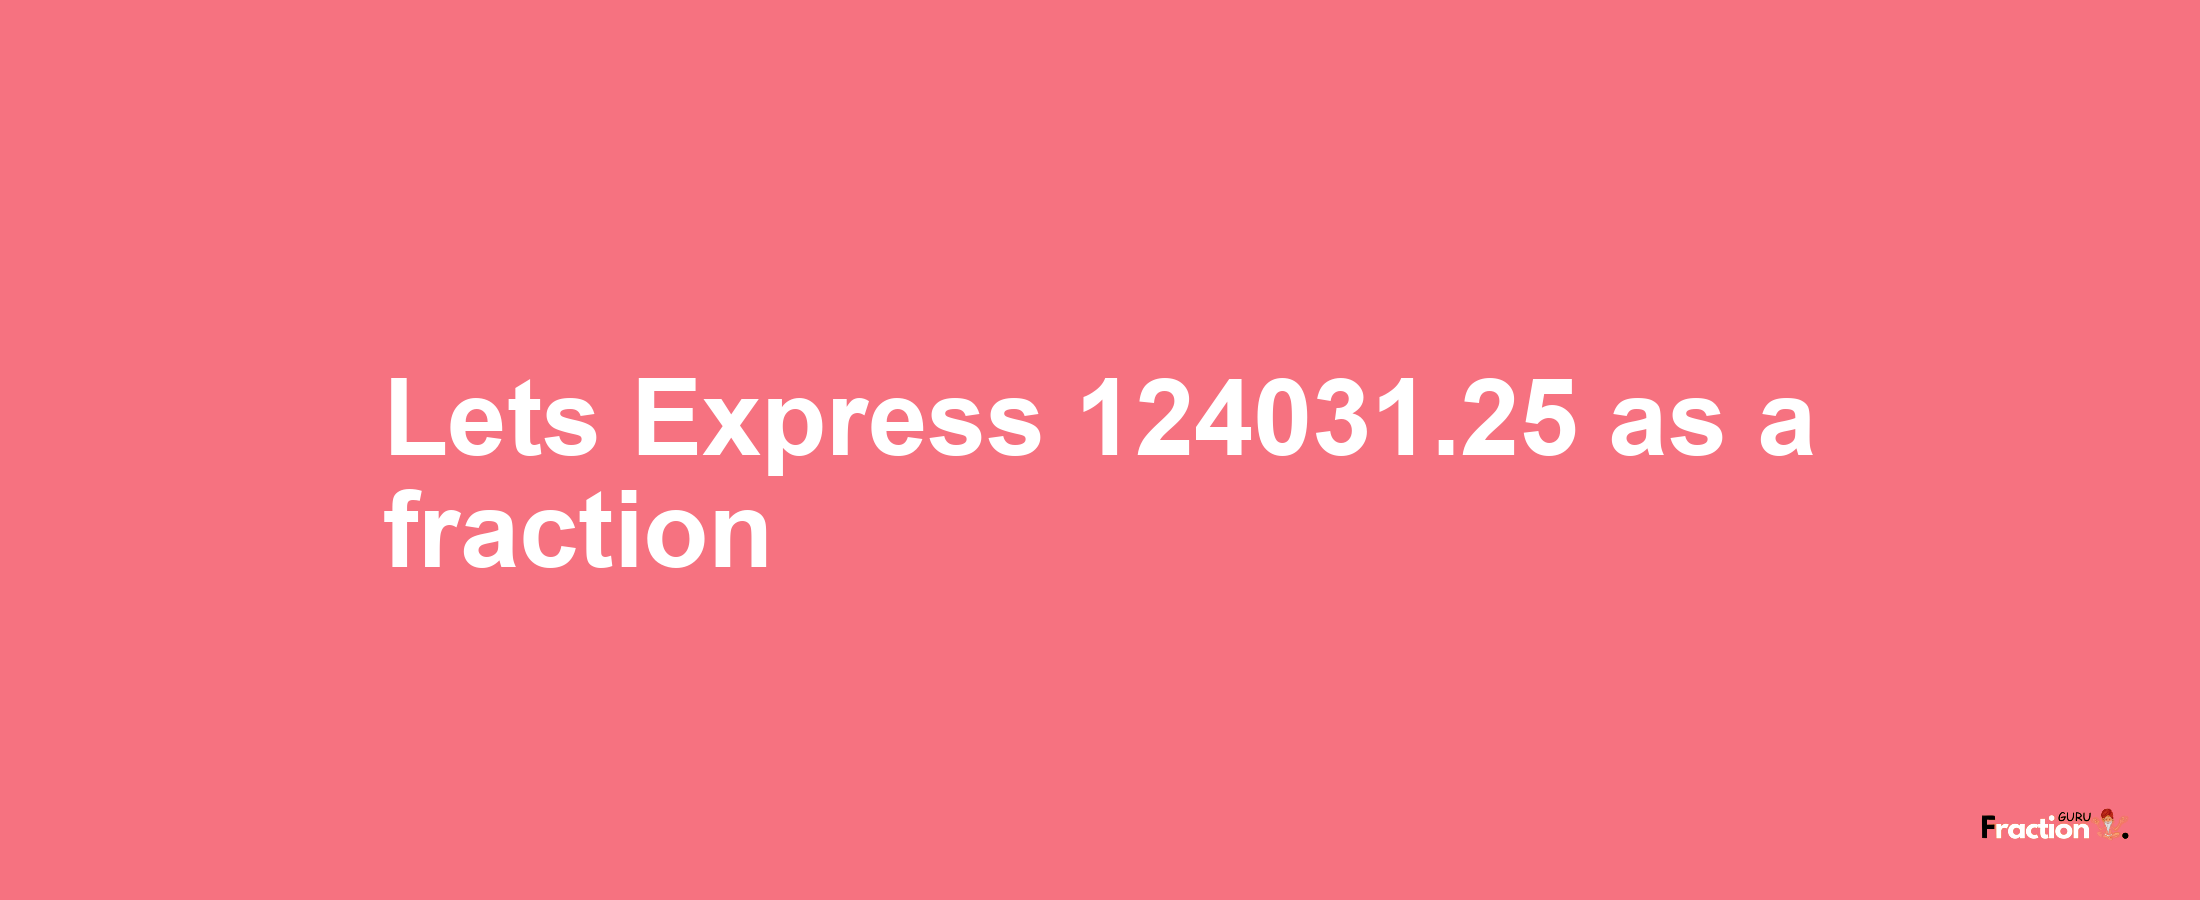 Lets Express 124031.25 as afraction